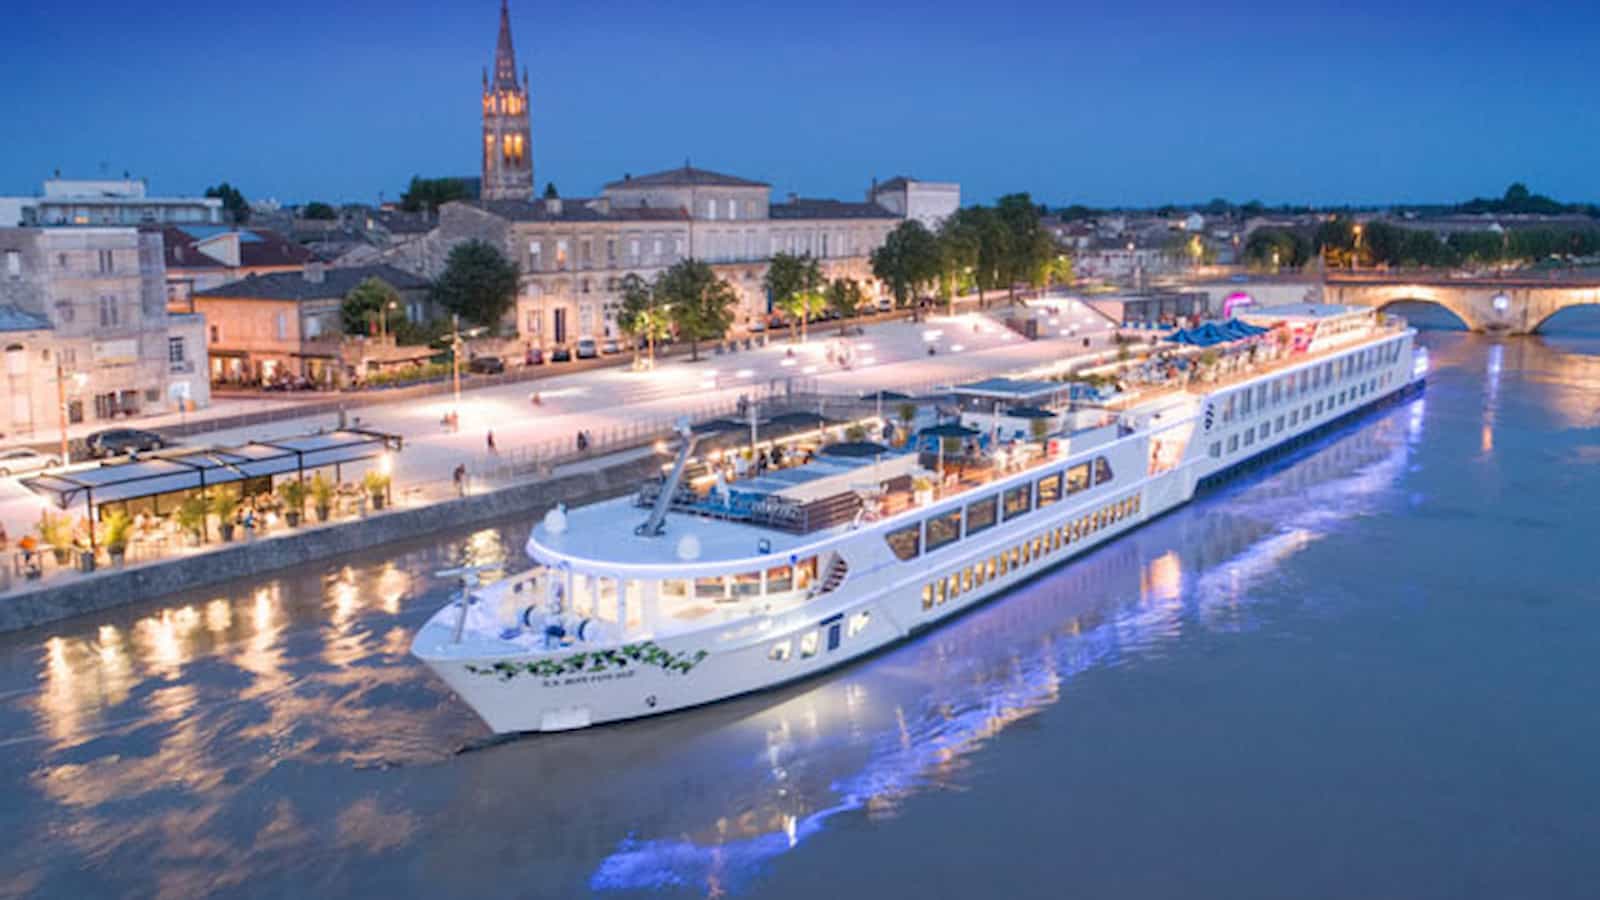 Top 7 River Cruise Itineraries, River Cruise